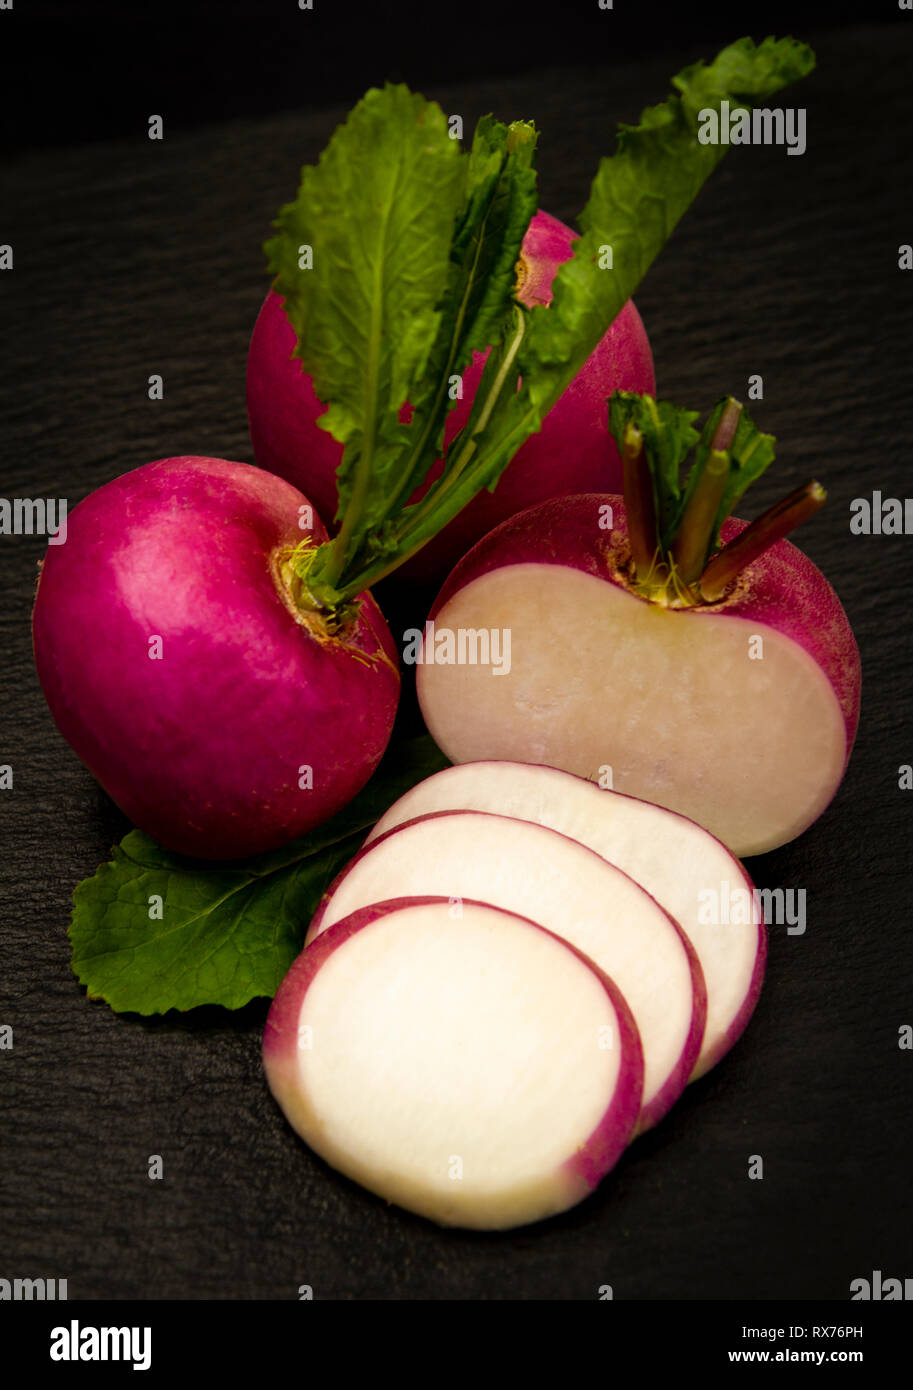 close-up of a red turnip sliced over a black background Stock Photo